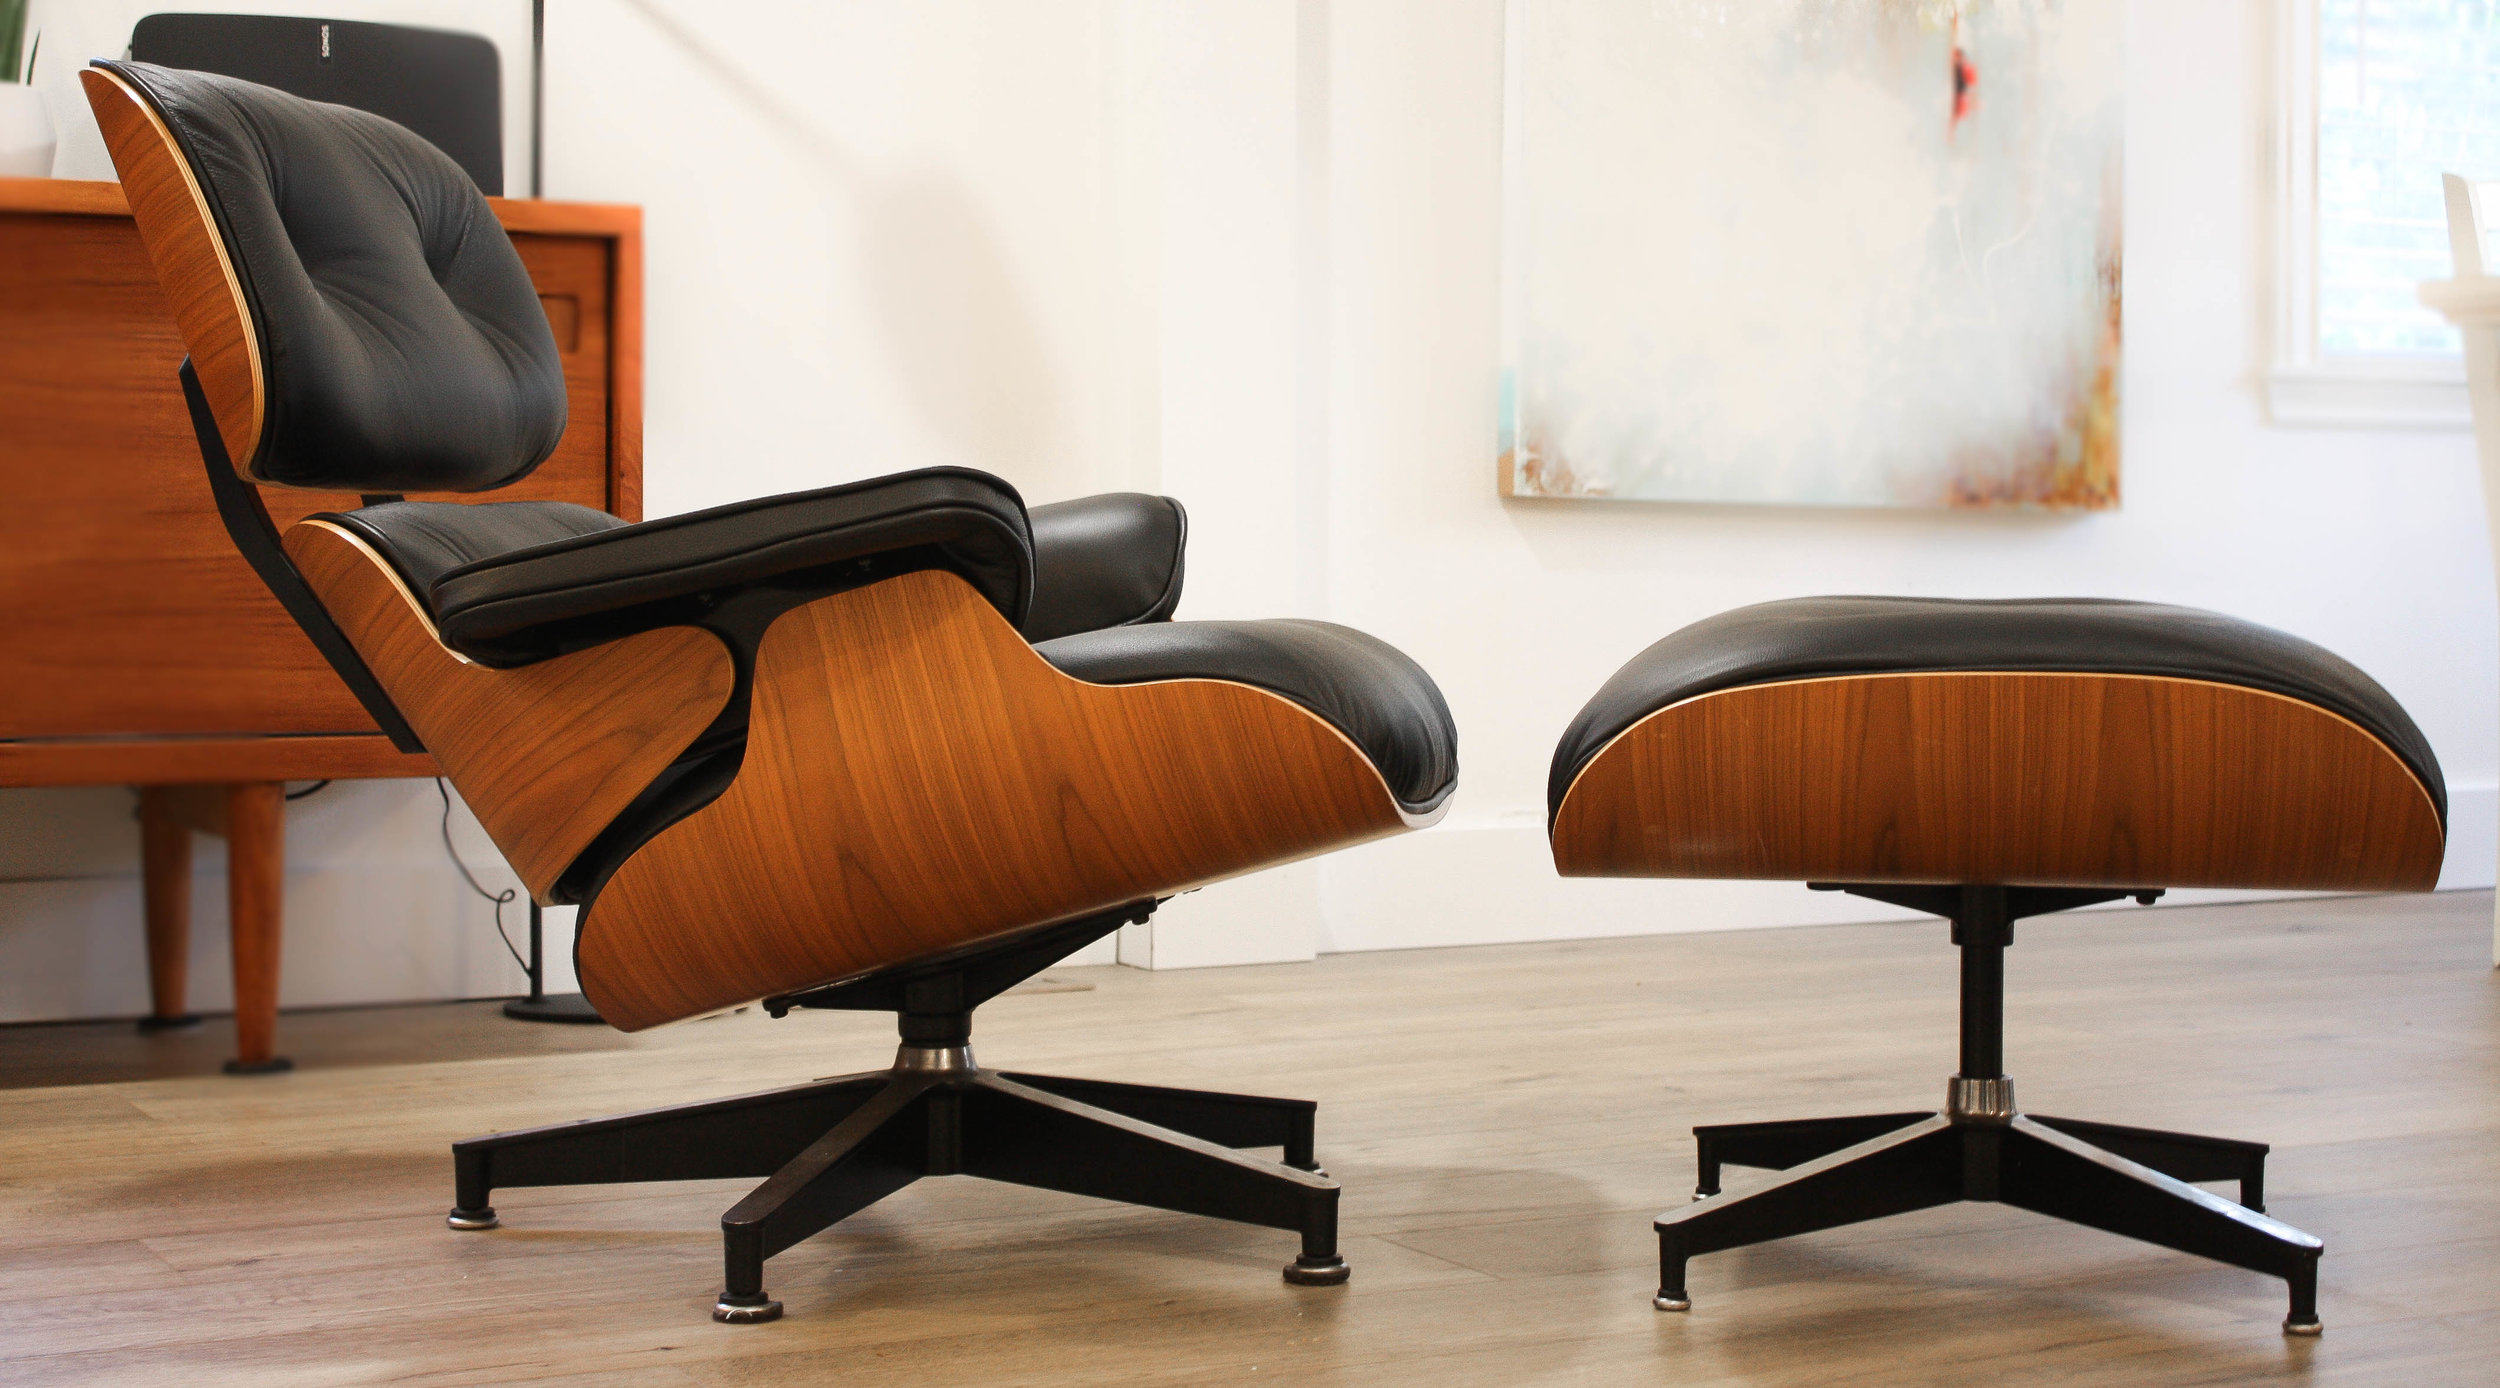 Walnut Eames Lounge Chair and Ottoman in Black Leather *SOLD 